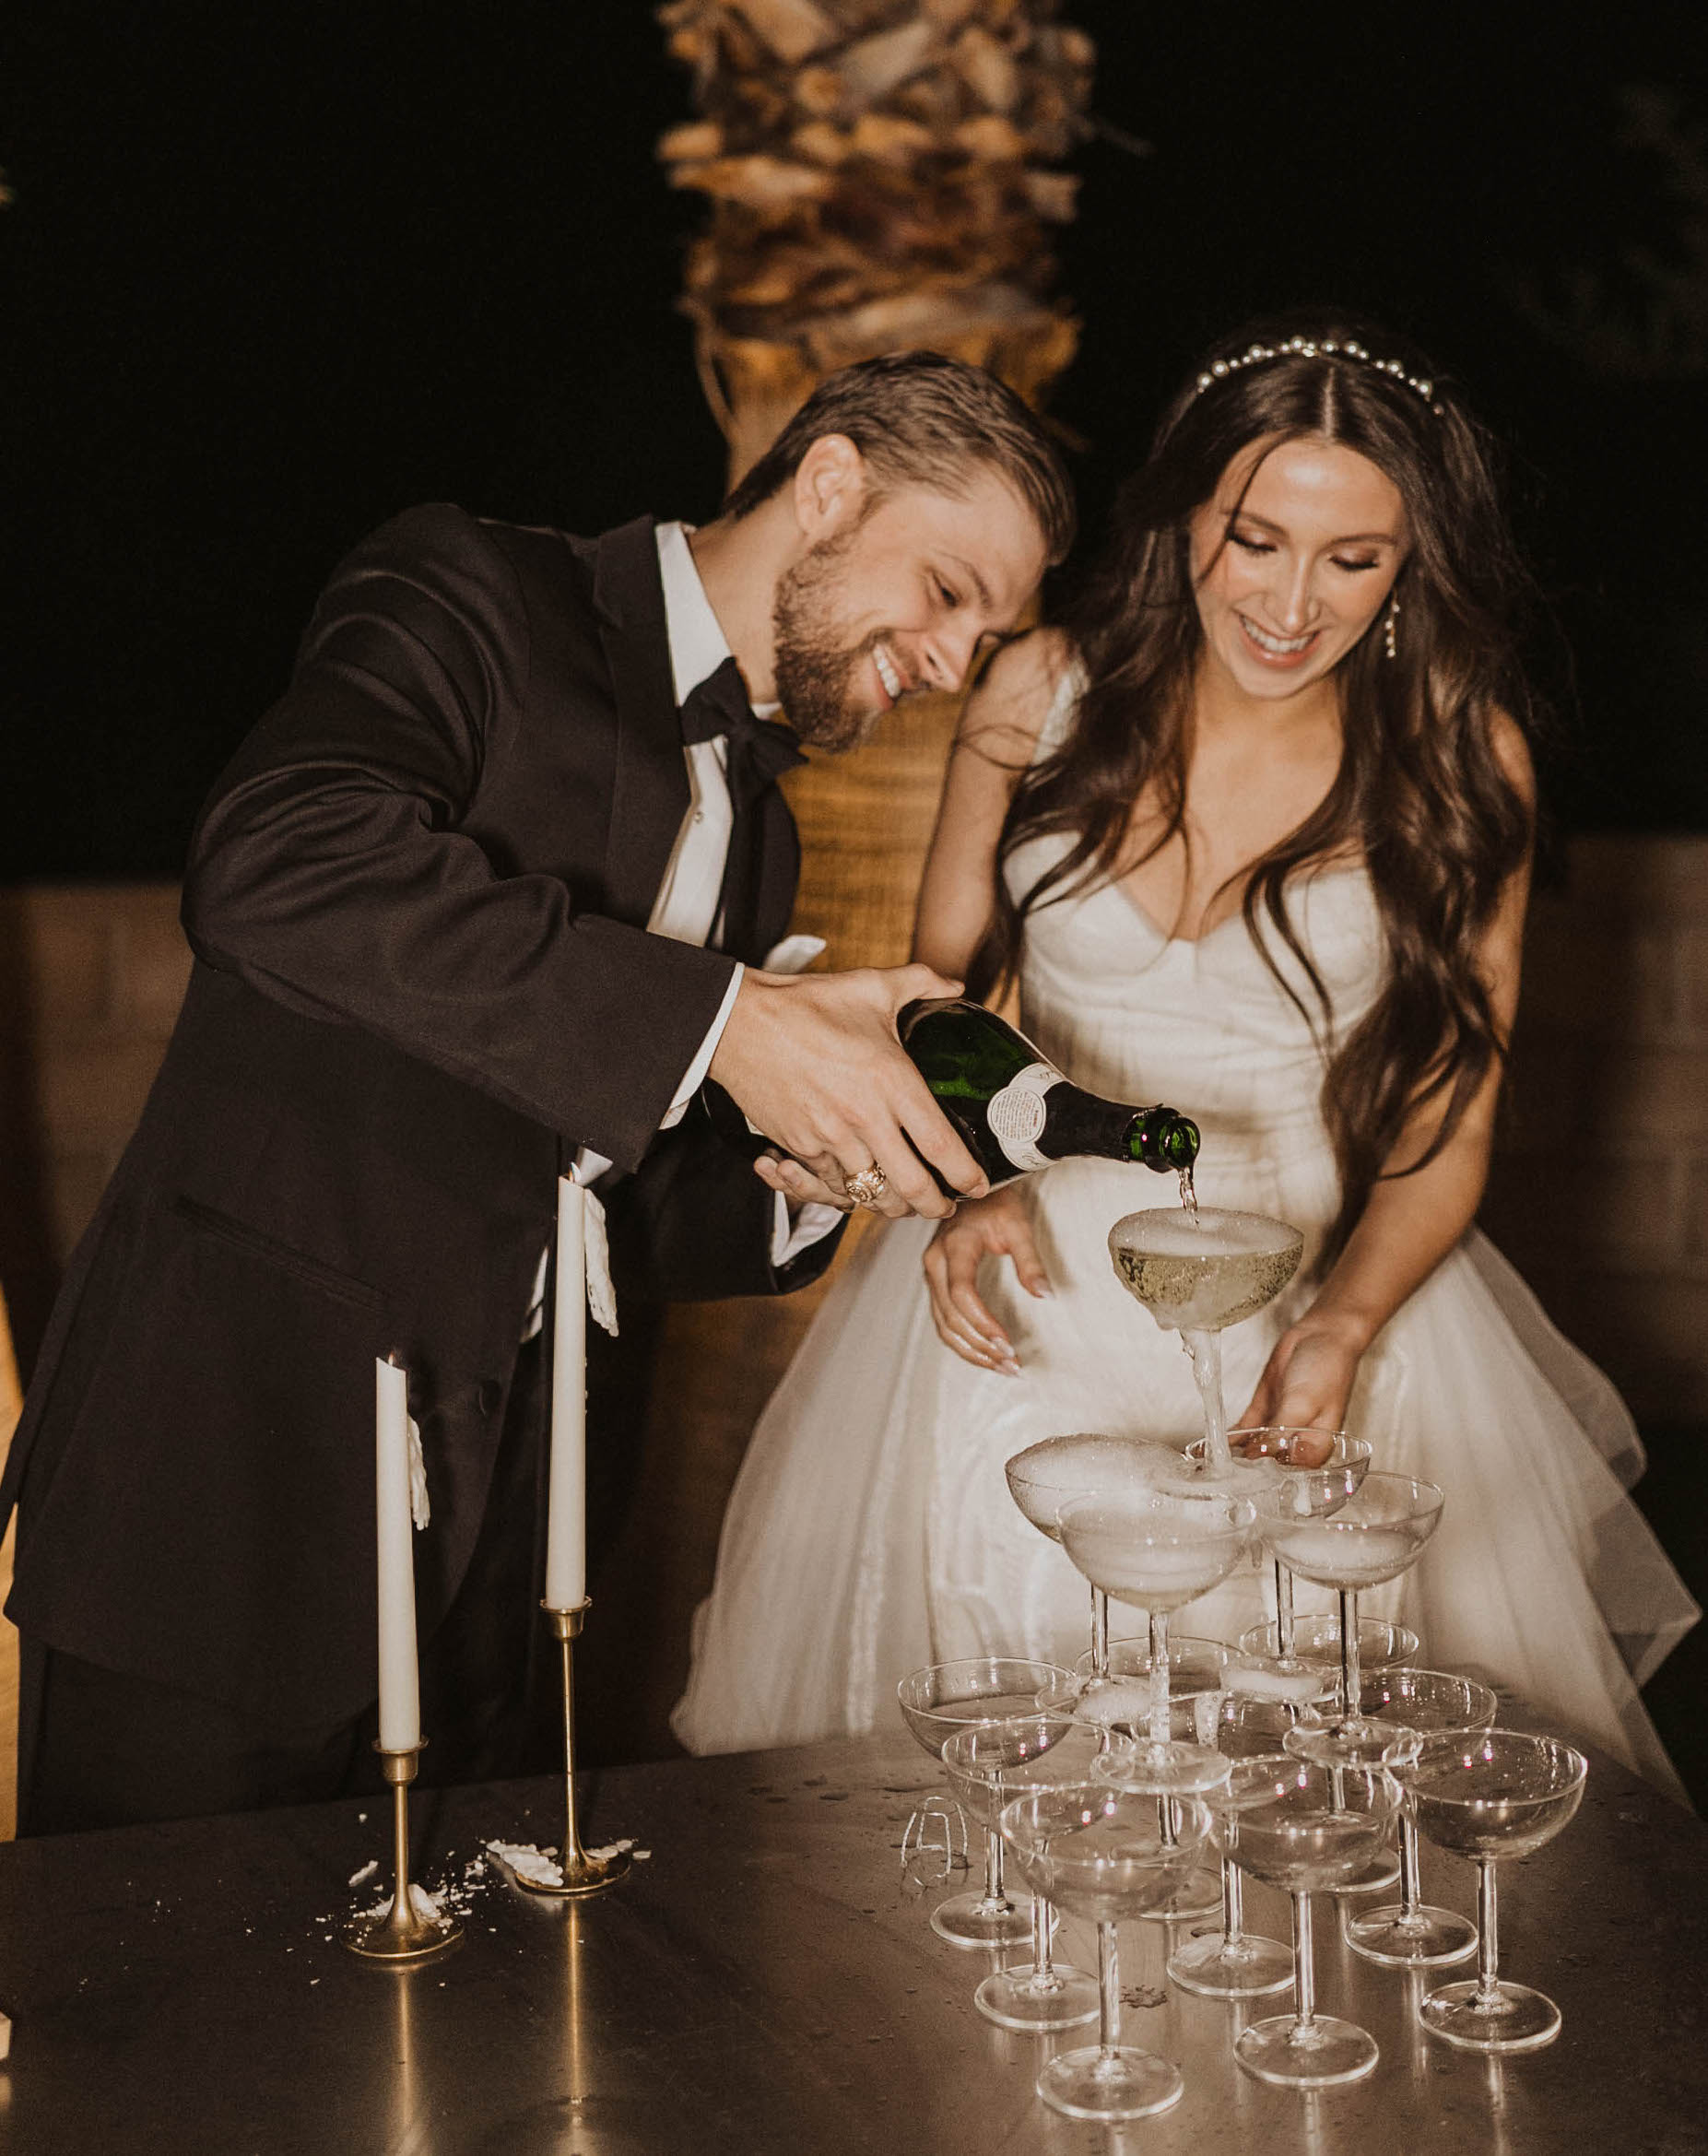 A bride and groom smile and pour champagne into a coupe tower at their wedding reception.